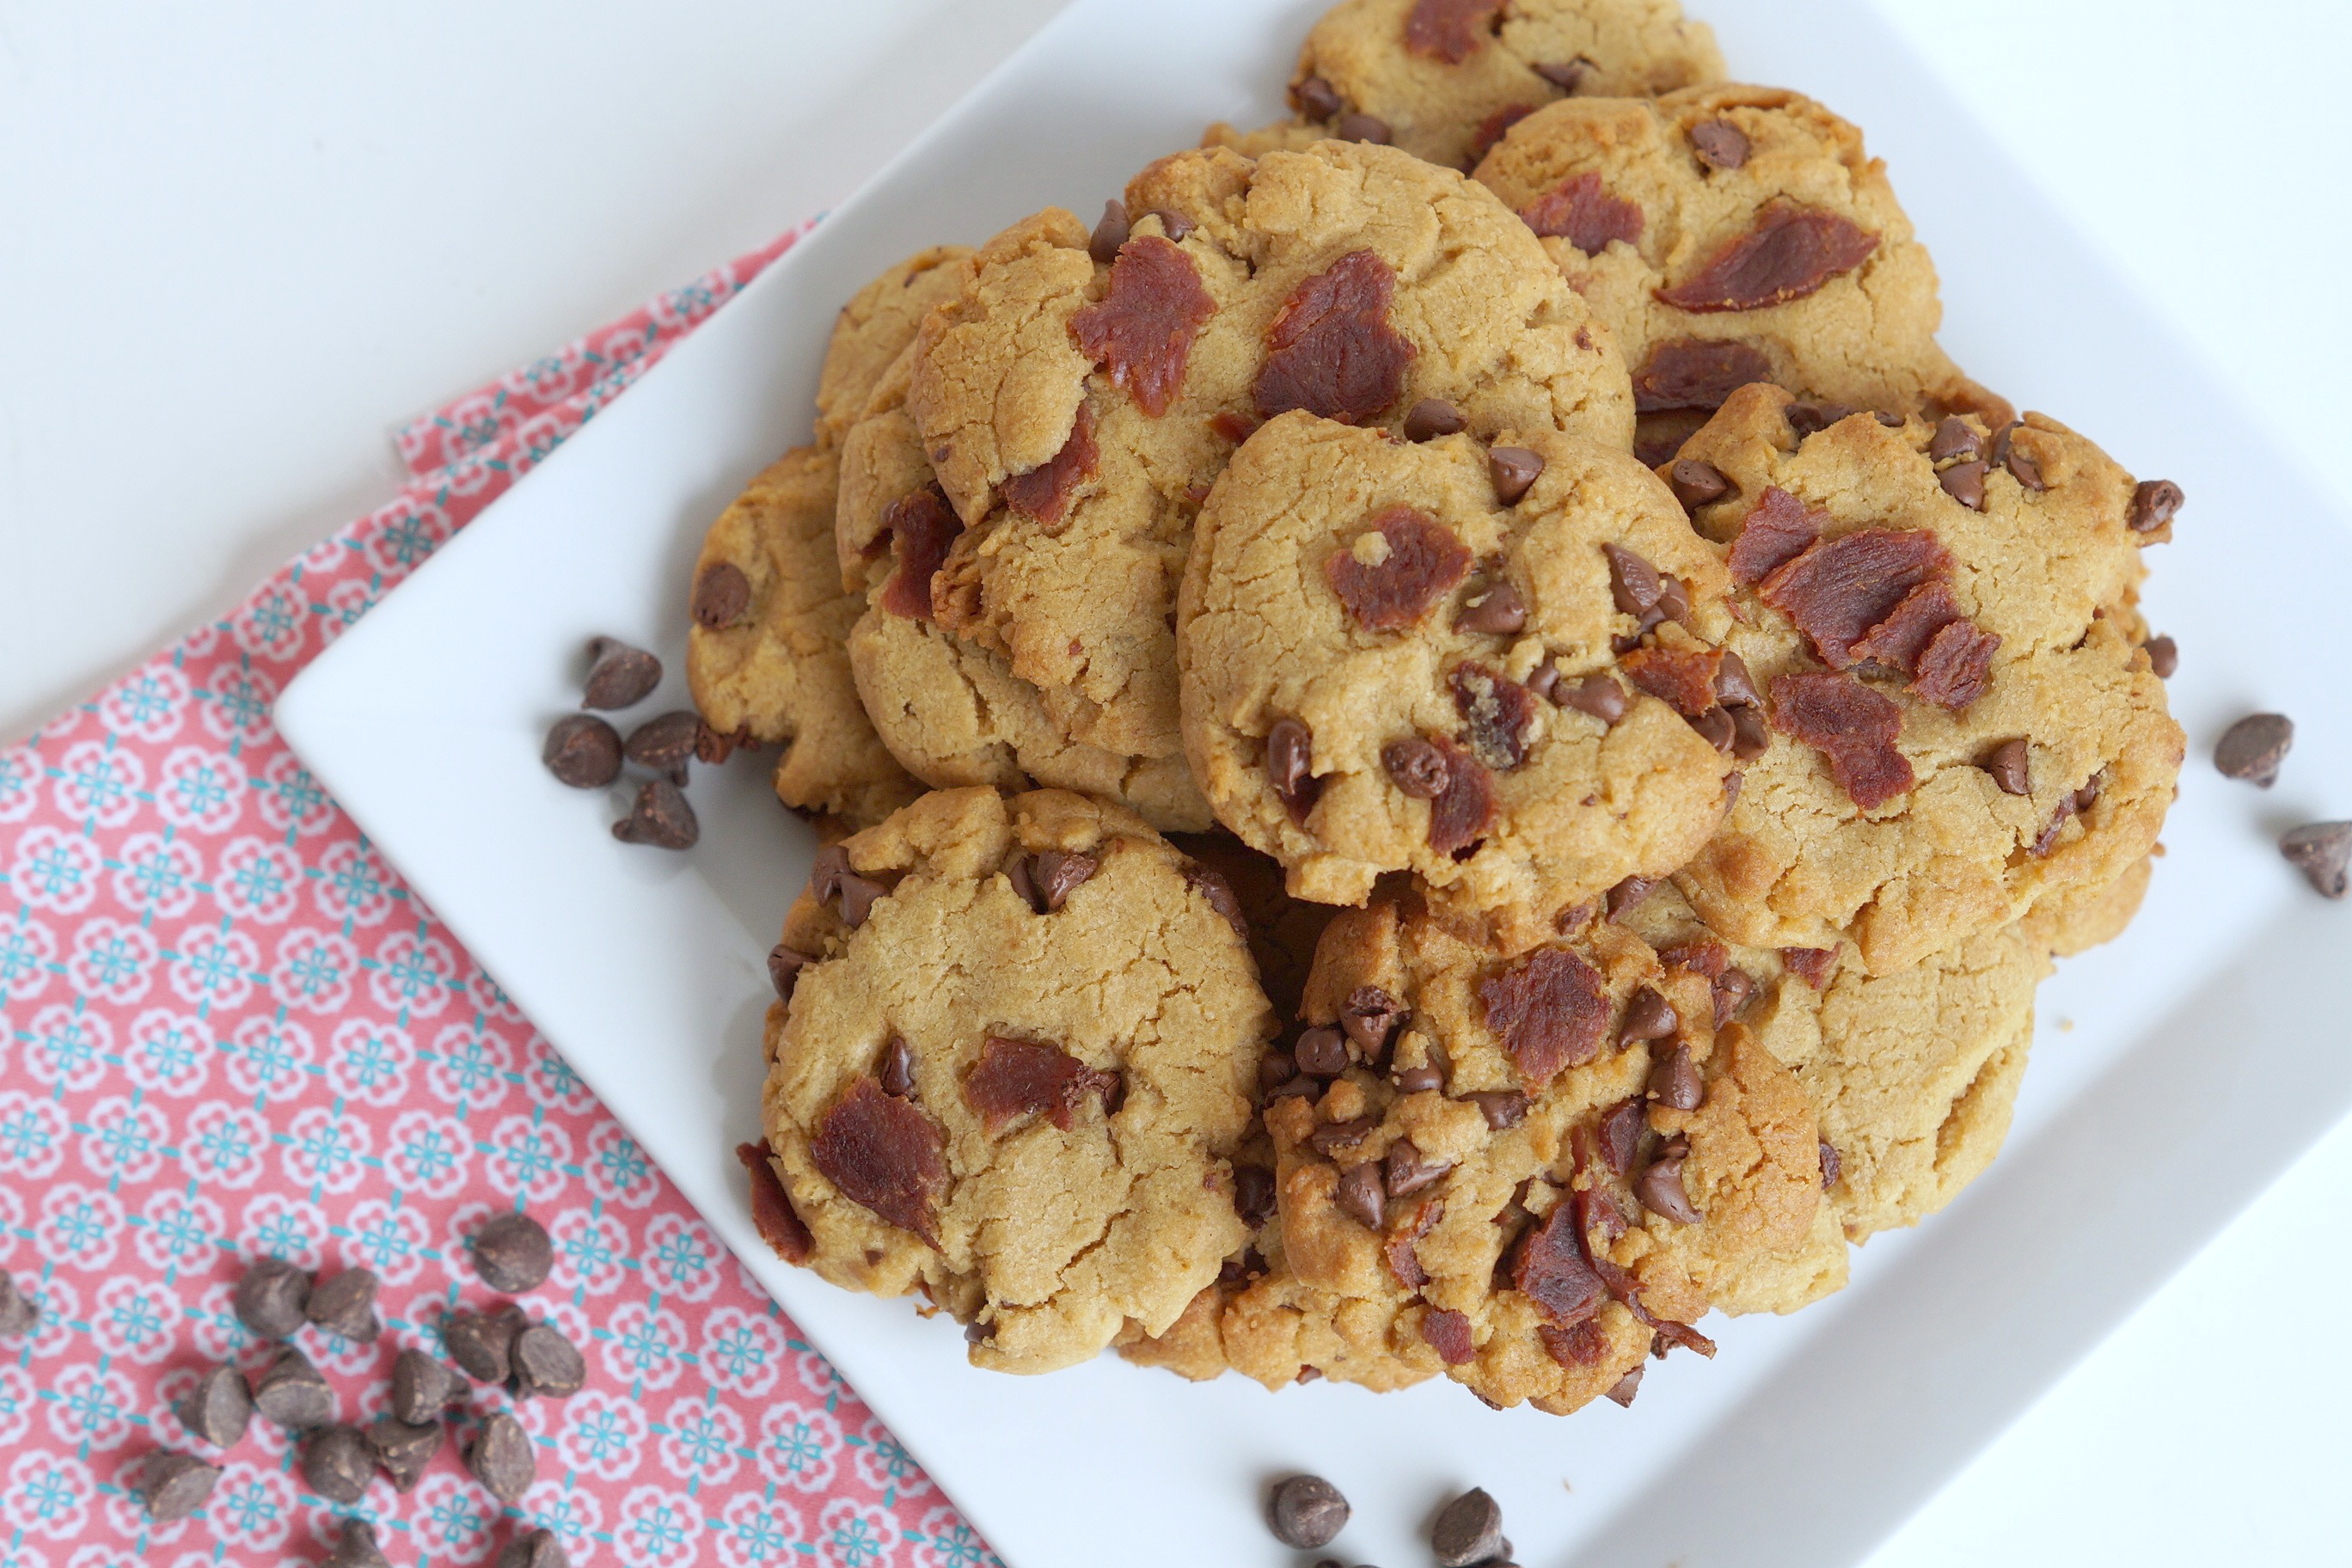 Follow this simple recipe for Peanut Butter Chocolate Chip Bacon Cookies and it's easy to #ServeUpSummer all year long! AD